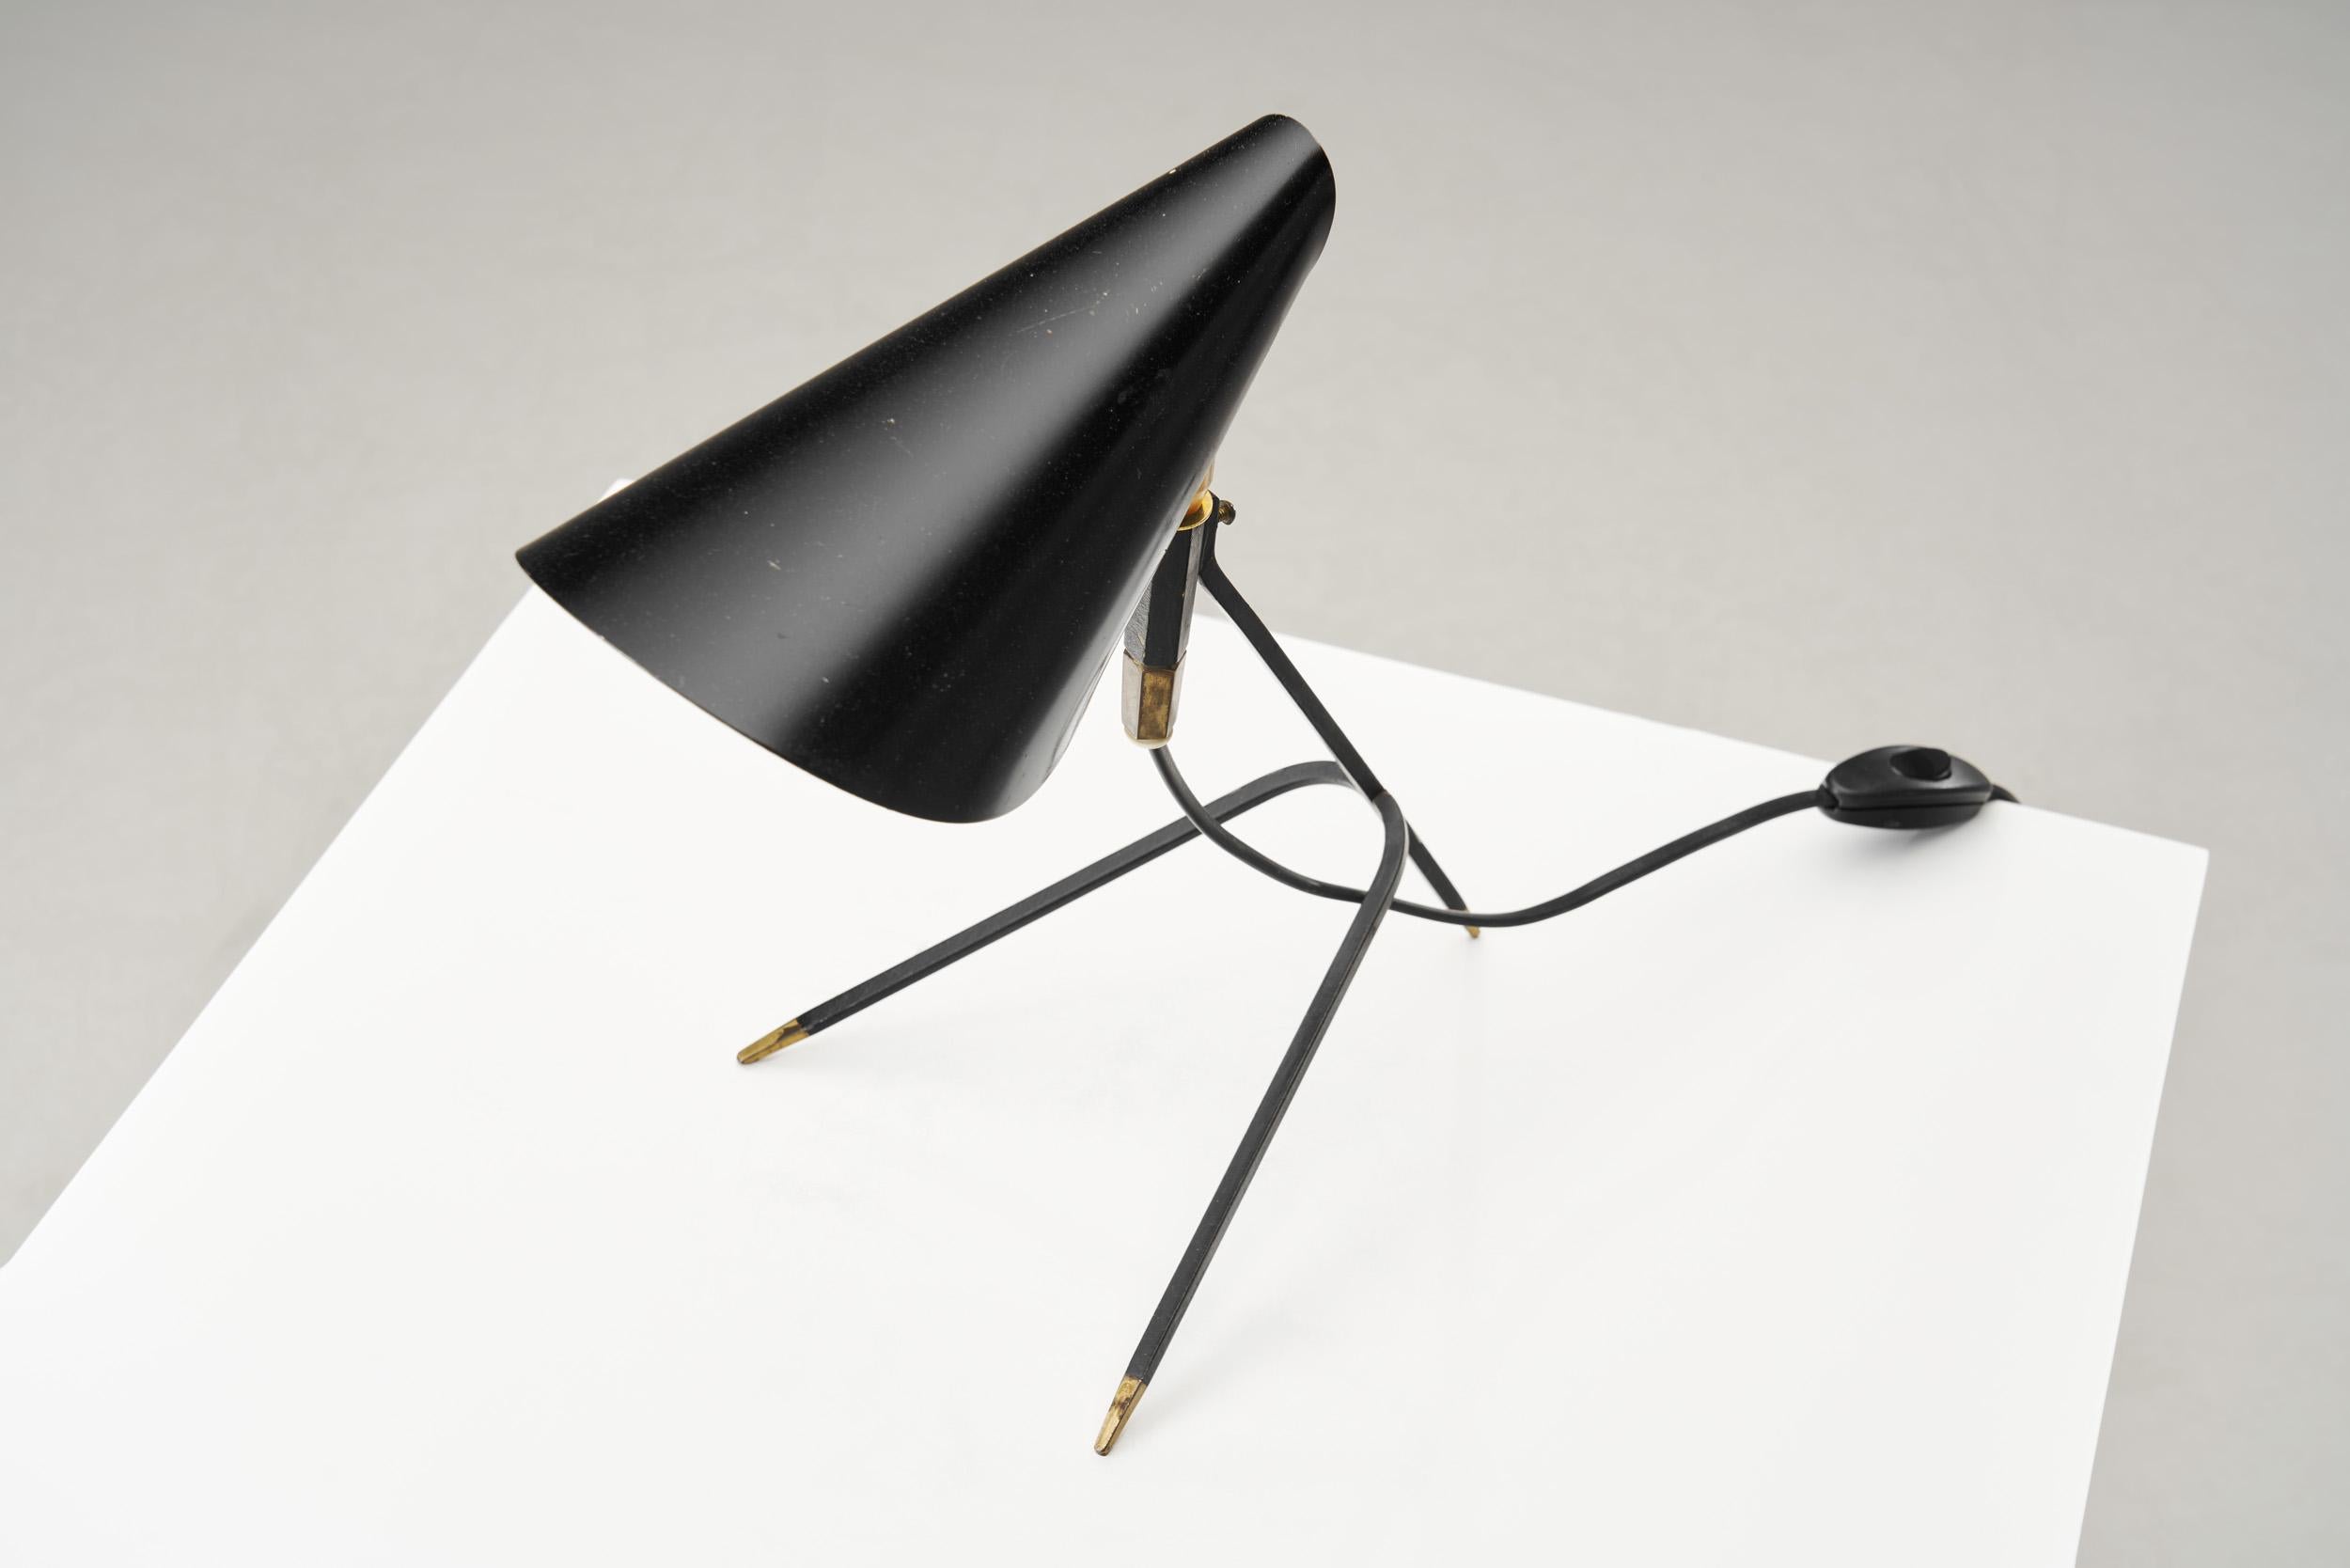 Lacquered Mid-Century Modern Table Lamp with Brass Details, Scandinavia ca 1960s For Sale 3